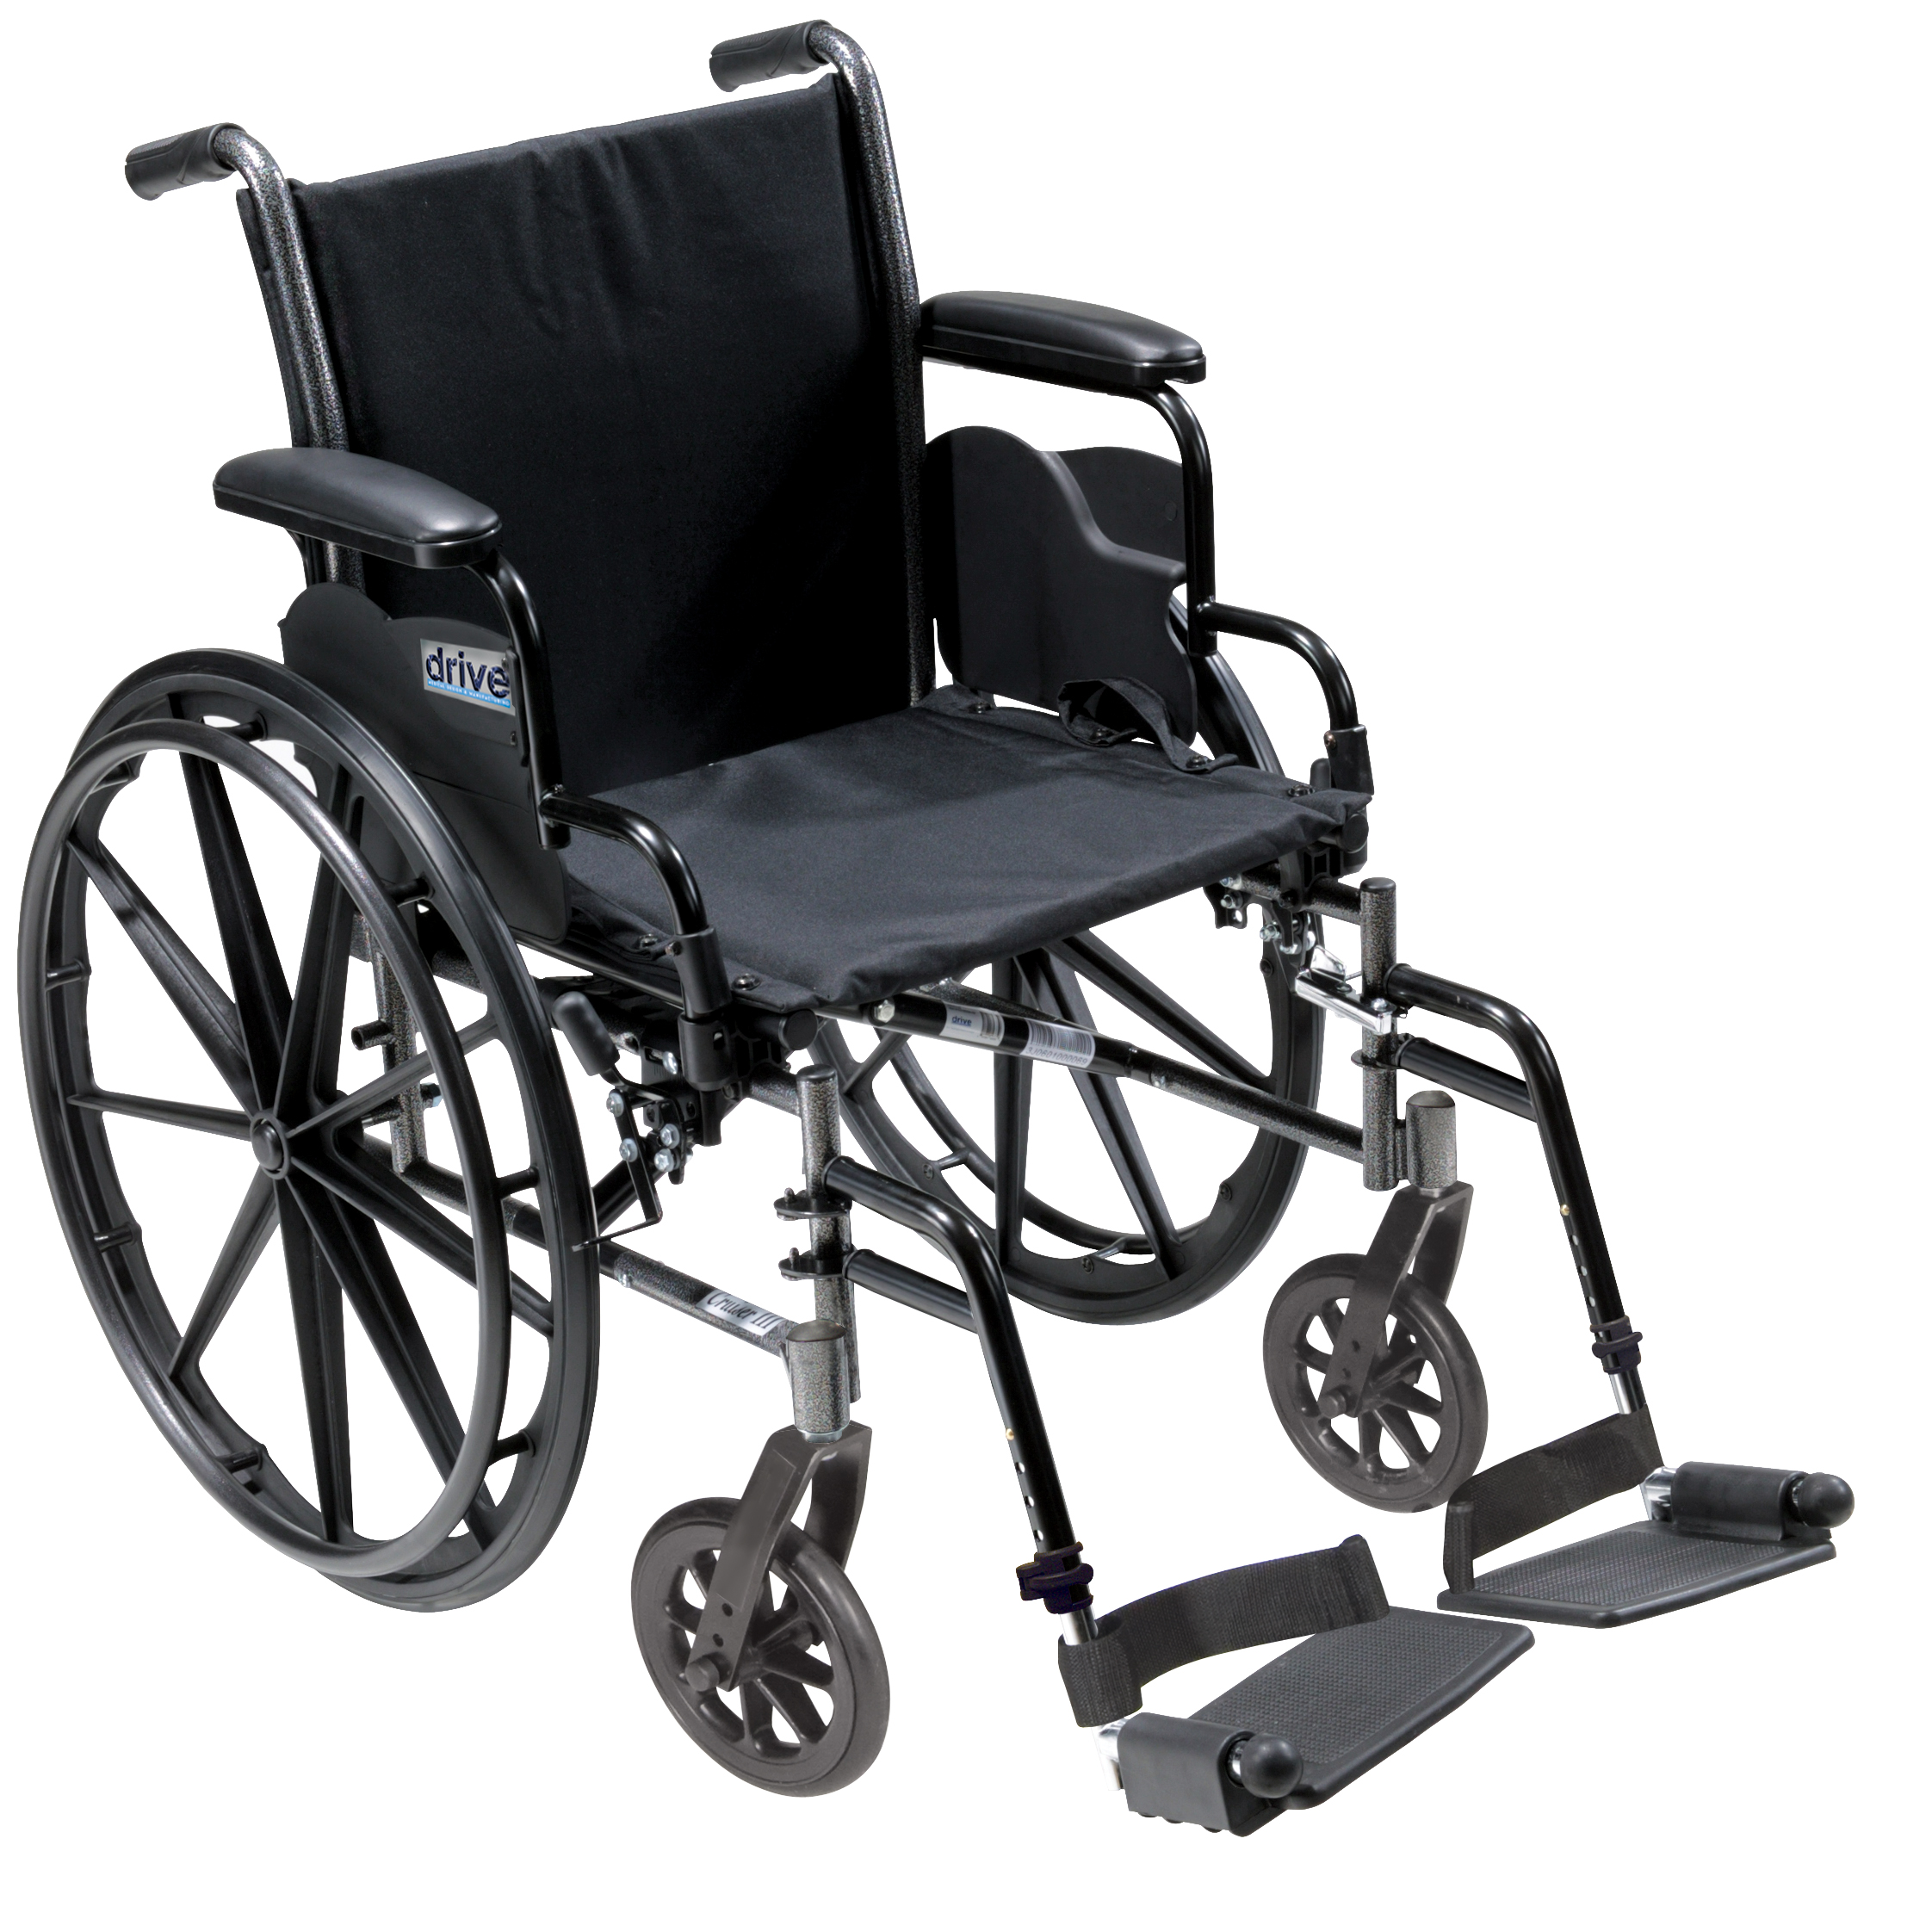 Drive Medical Cruiser III Light Weight Wheelchair with Flip Back Removable Arms, Desk Arms, Swing away Footrests, 18" Seat - image 1 of 2